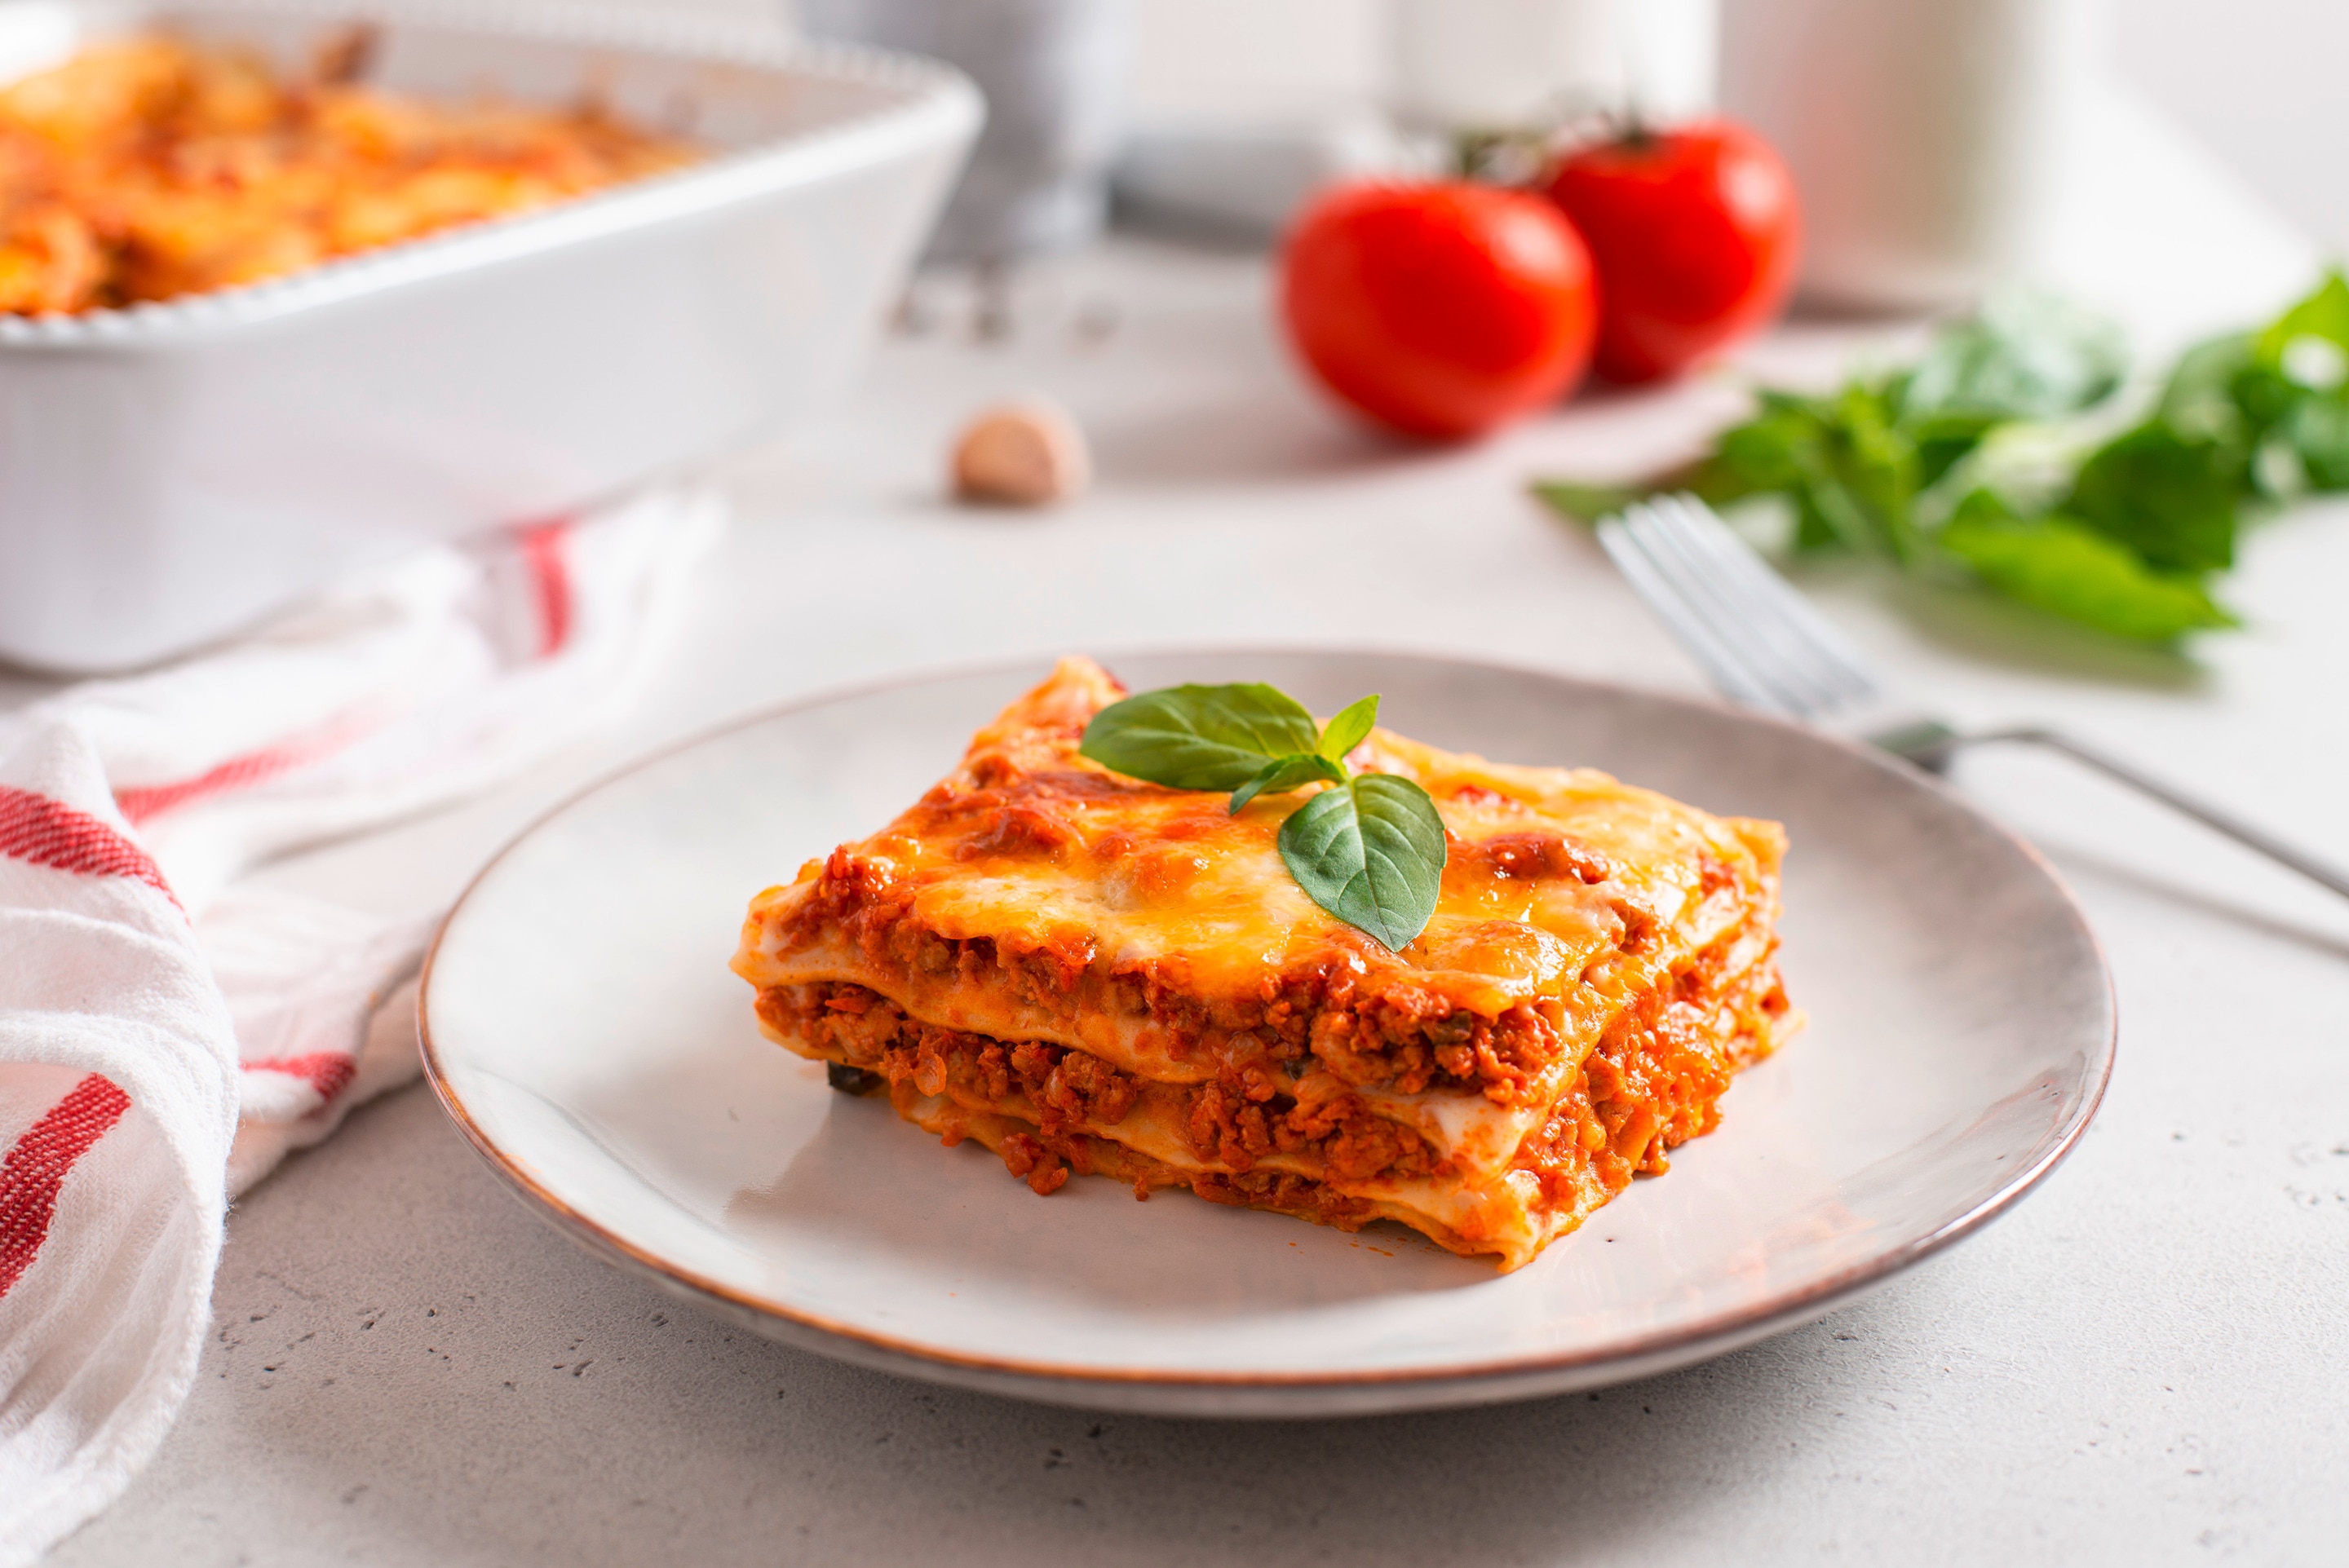 A plate with a slice of lasagna garnished with fresh basil leaves